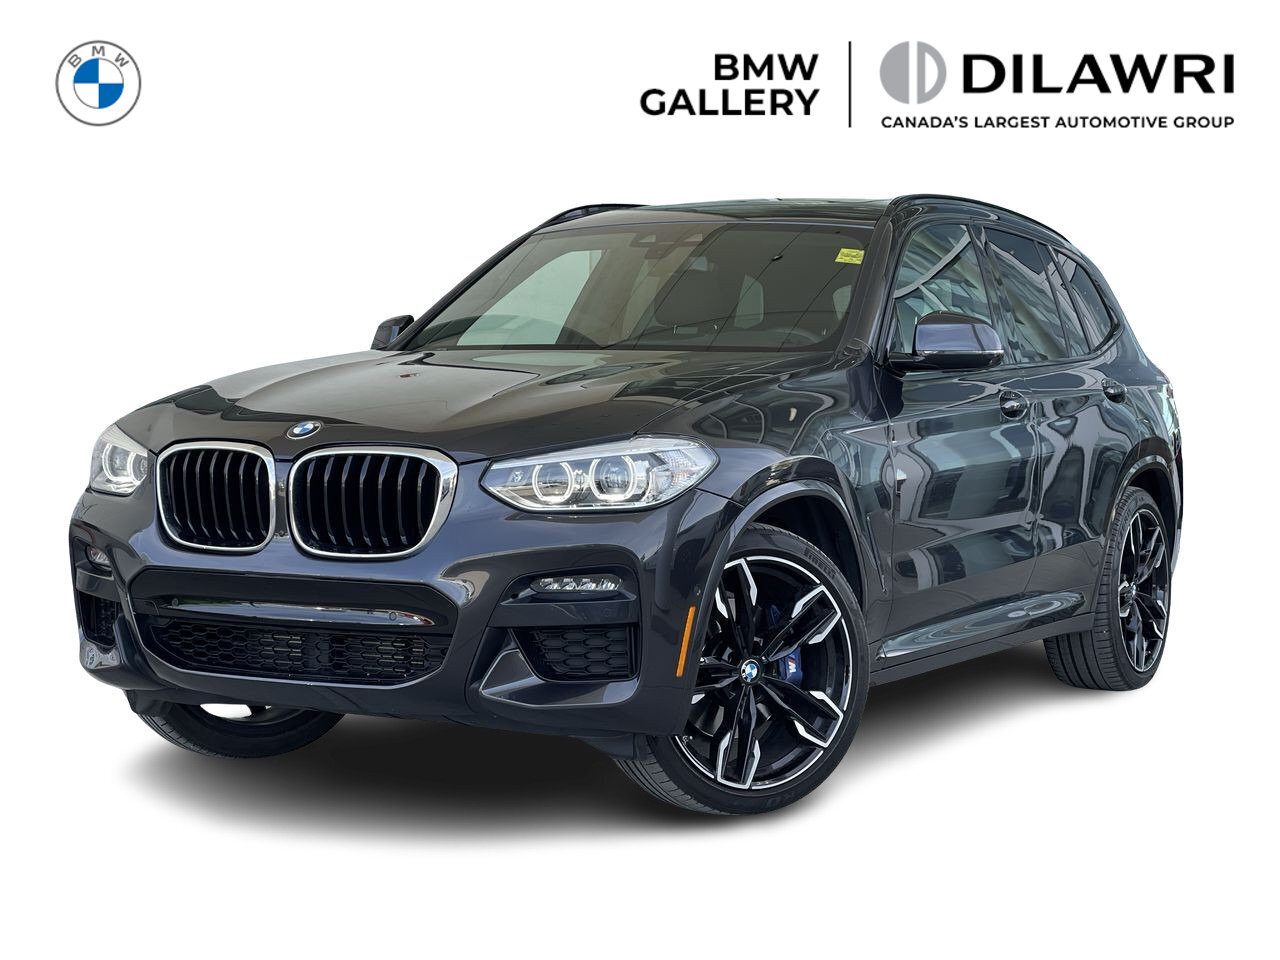 2021 BMW X3 XDrive30i Comfort Access, 1 Owner, Local Trade-In,